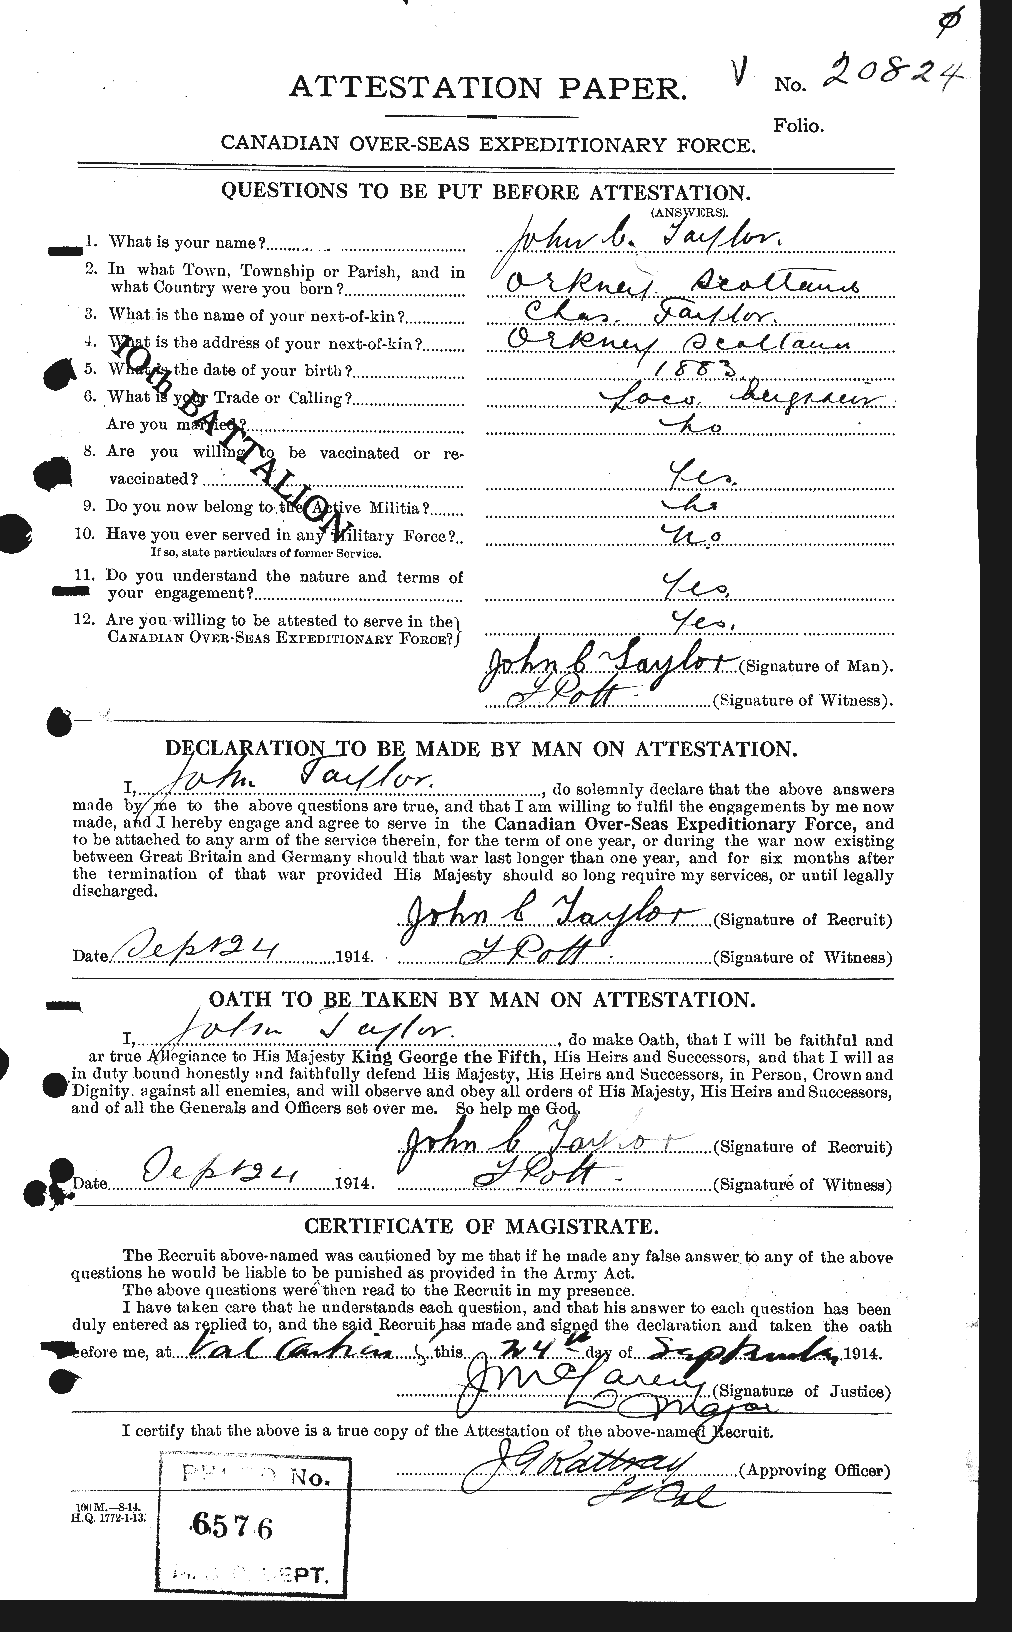 Personnel Records of the First World War - CEF 627053a